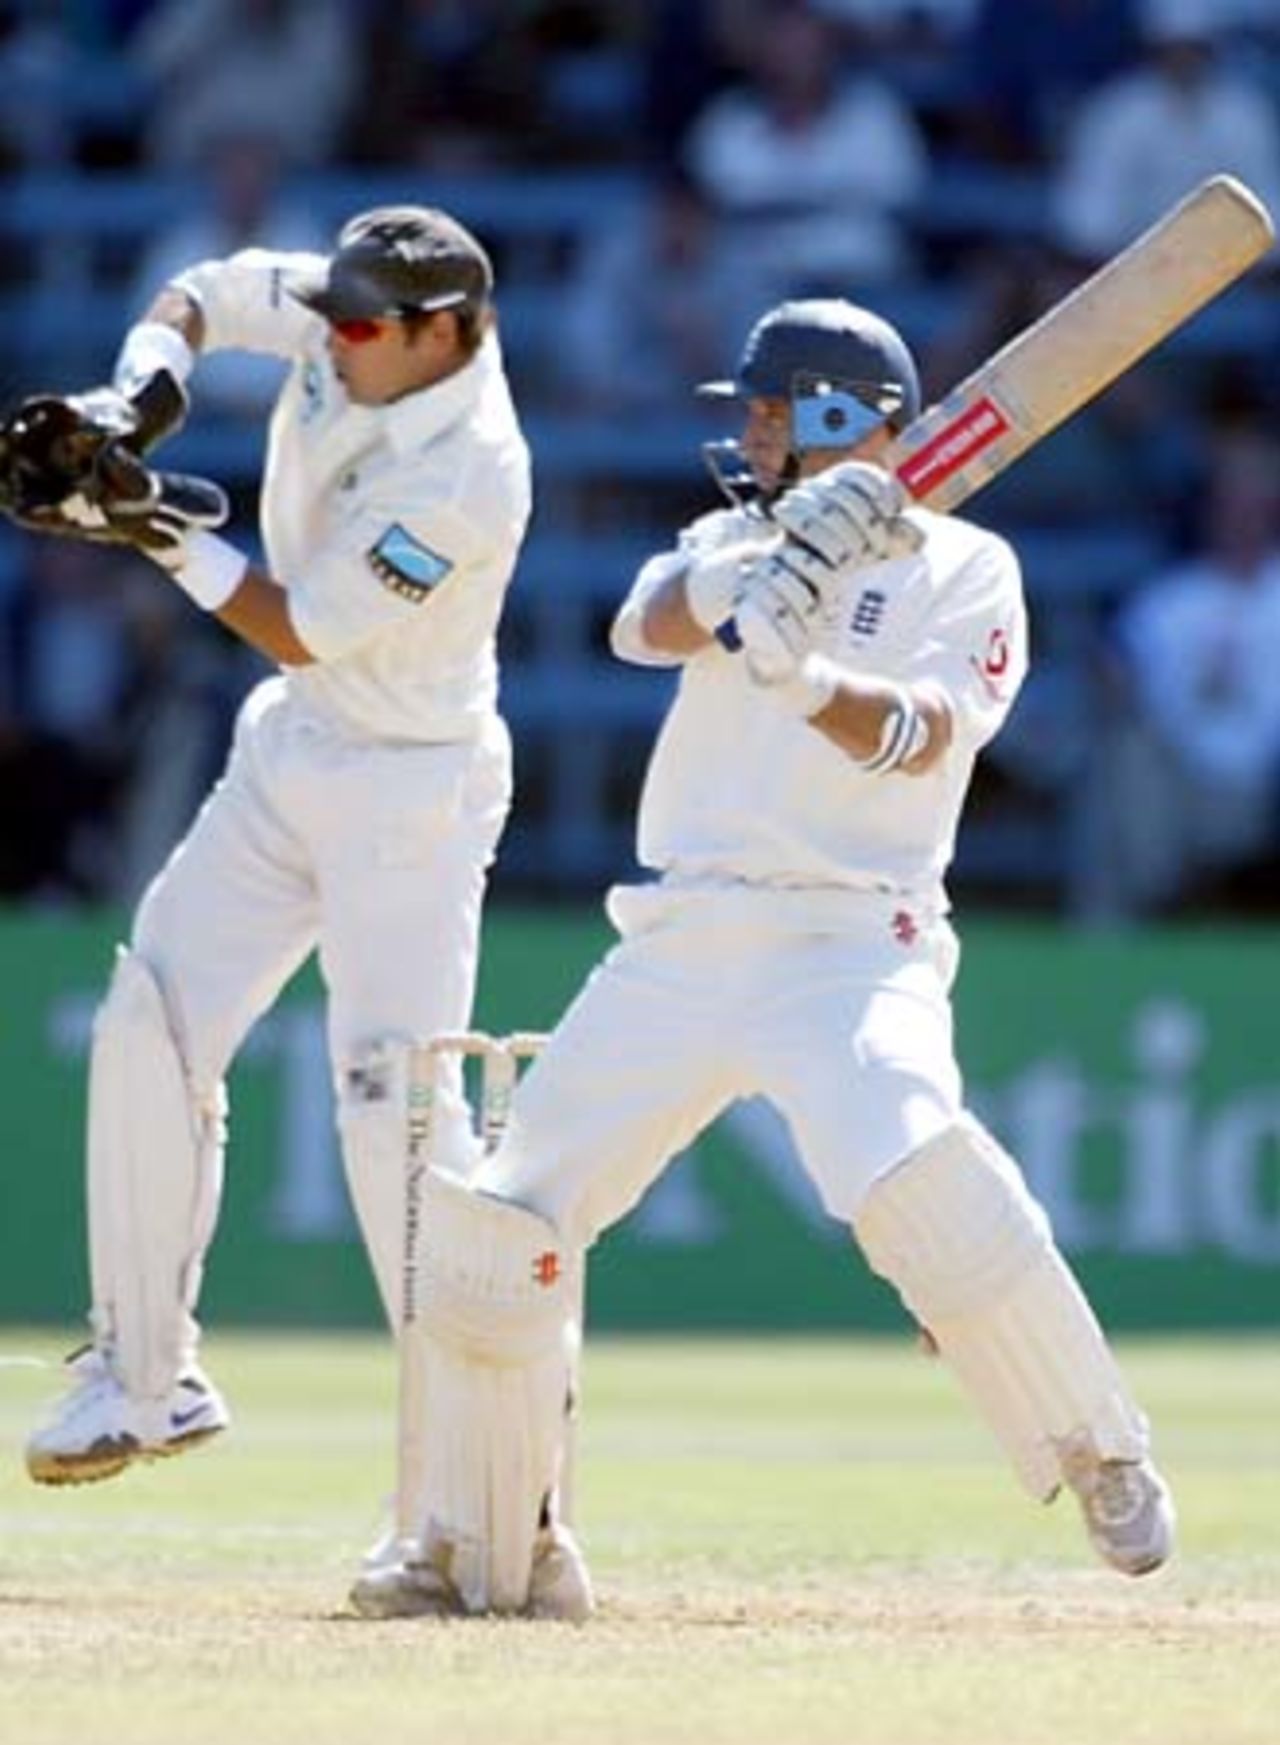 England batsman Nasser Hussain cuts a delivery from New Zealand bowler Daniel Vettori as wicket-keeper Adam Parore looks on. Hussain went on to score 66 in his first innings. 2nd Test: New Zealand v England at Basin Reserve, Wellington, 21-25 March 2002 (22 March 2002).